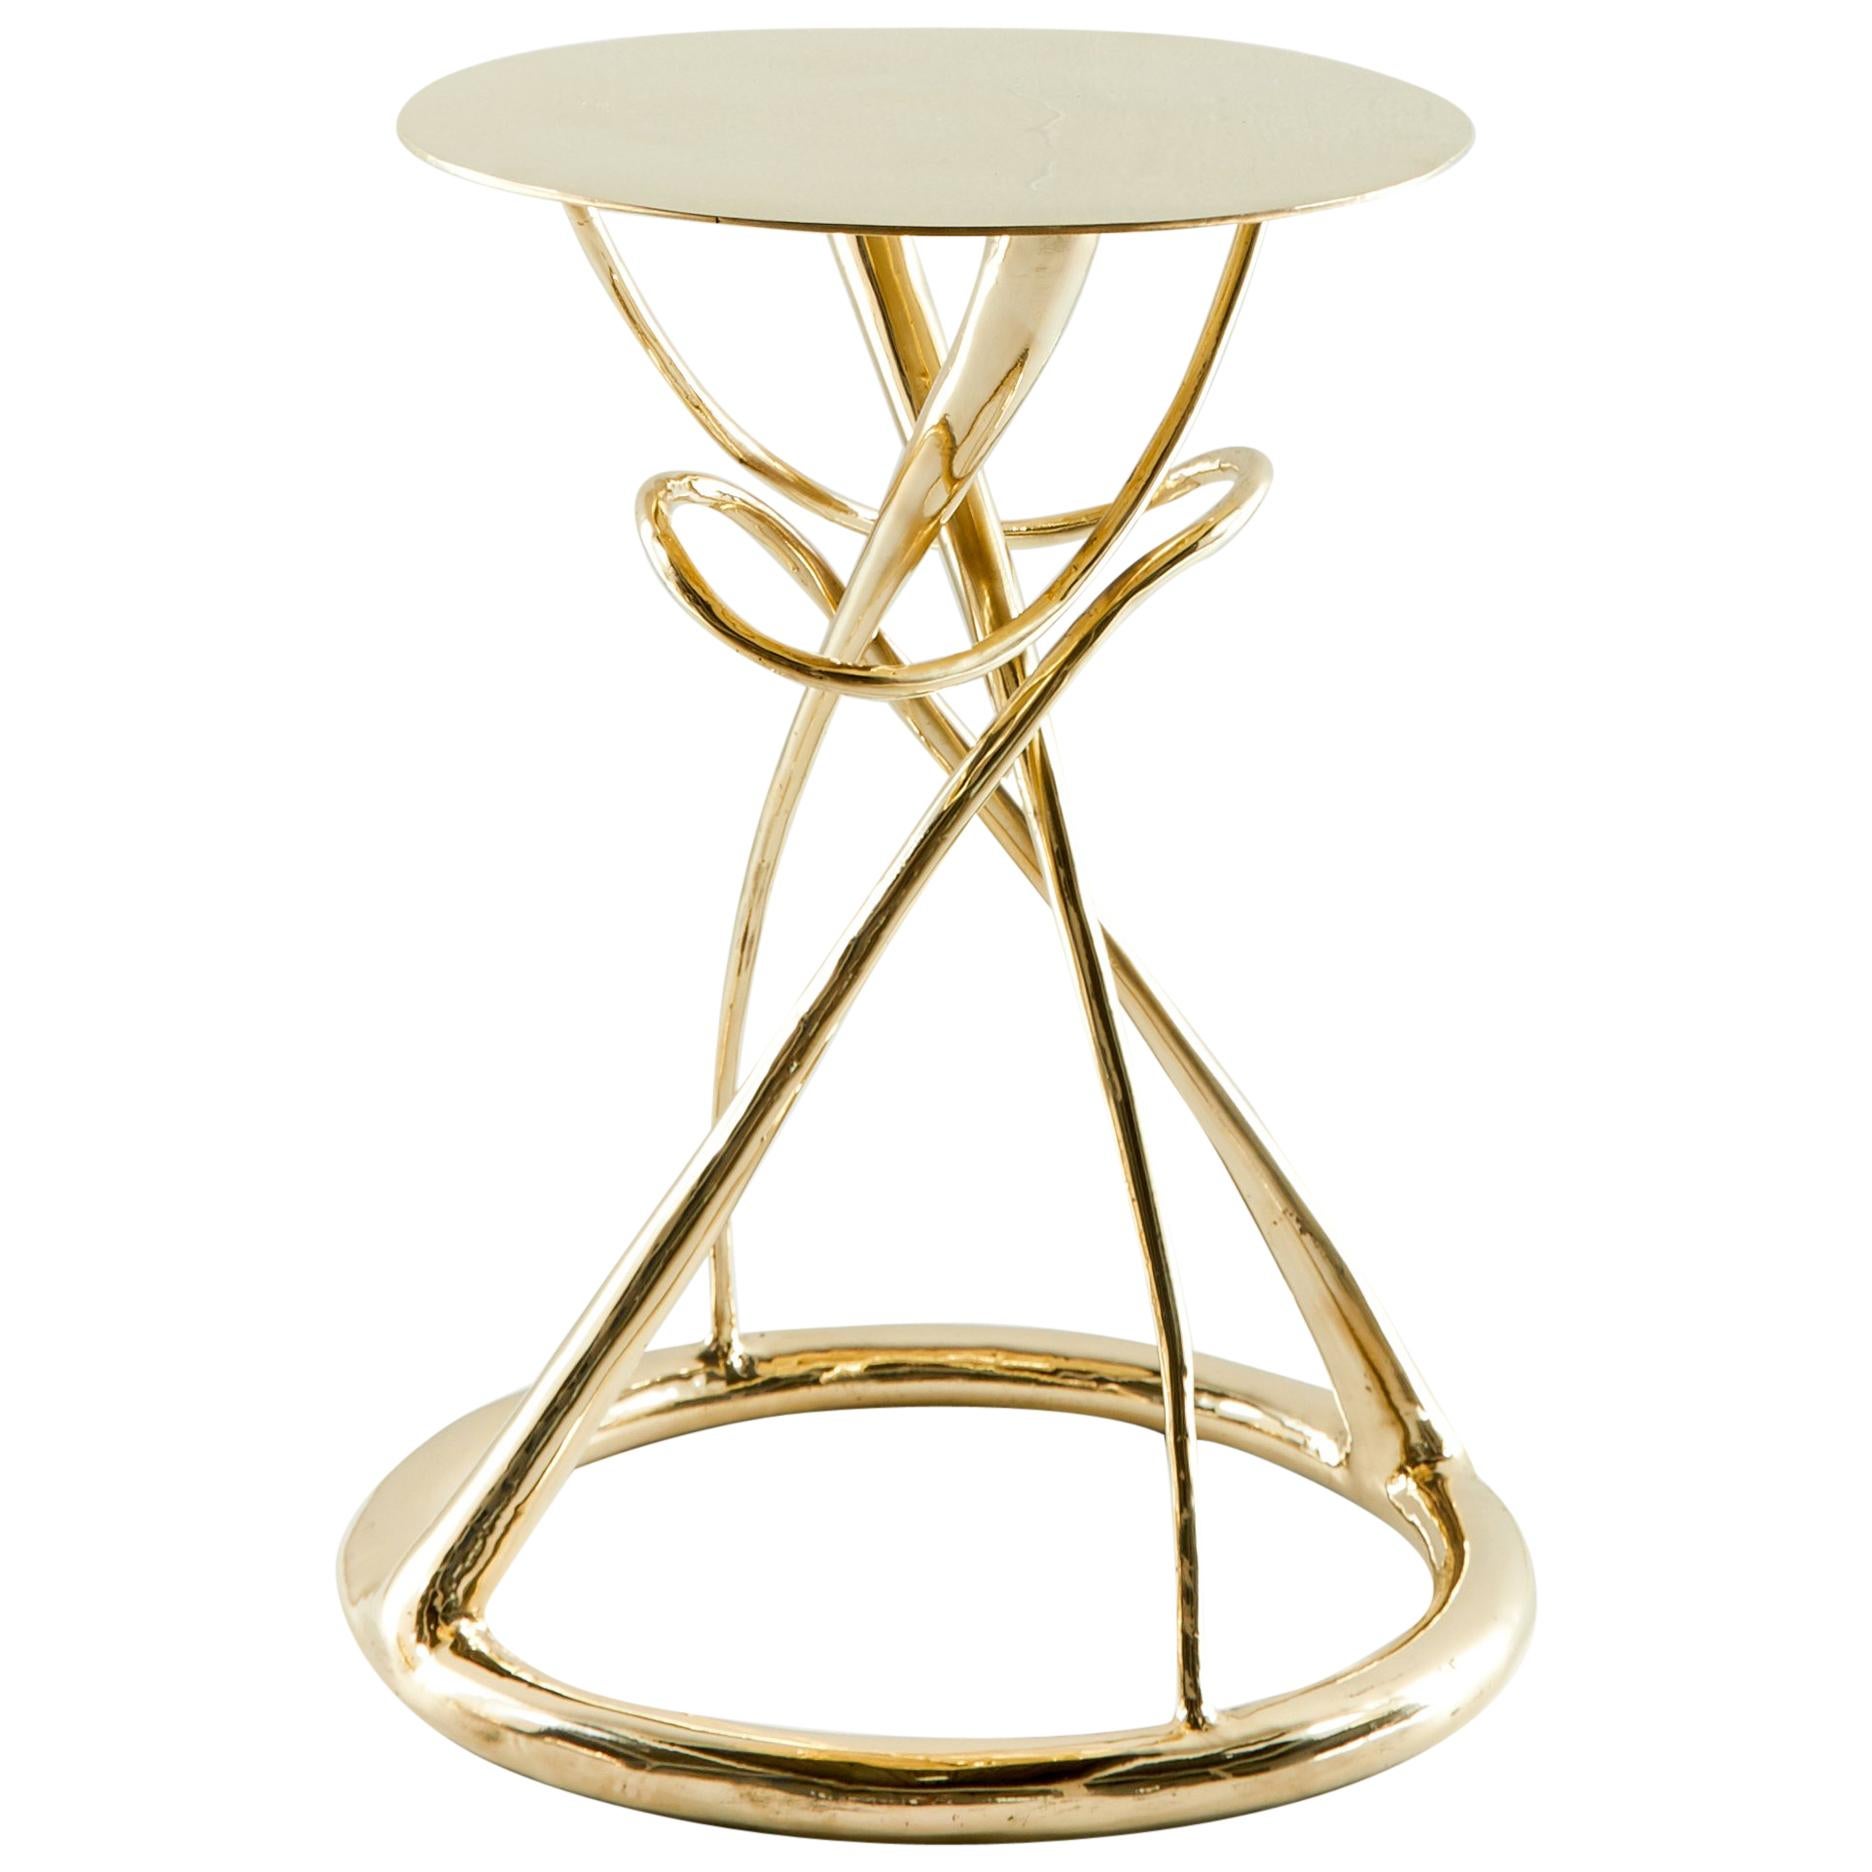 Pair of brass gueridon table, Gordian Node, Misaya.
Dimensions: W 40 x L 40 x H 50 cm
Hand-sculpted brass table.
Available with glass or brass top.